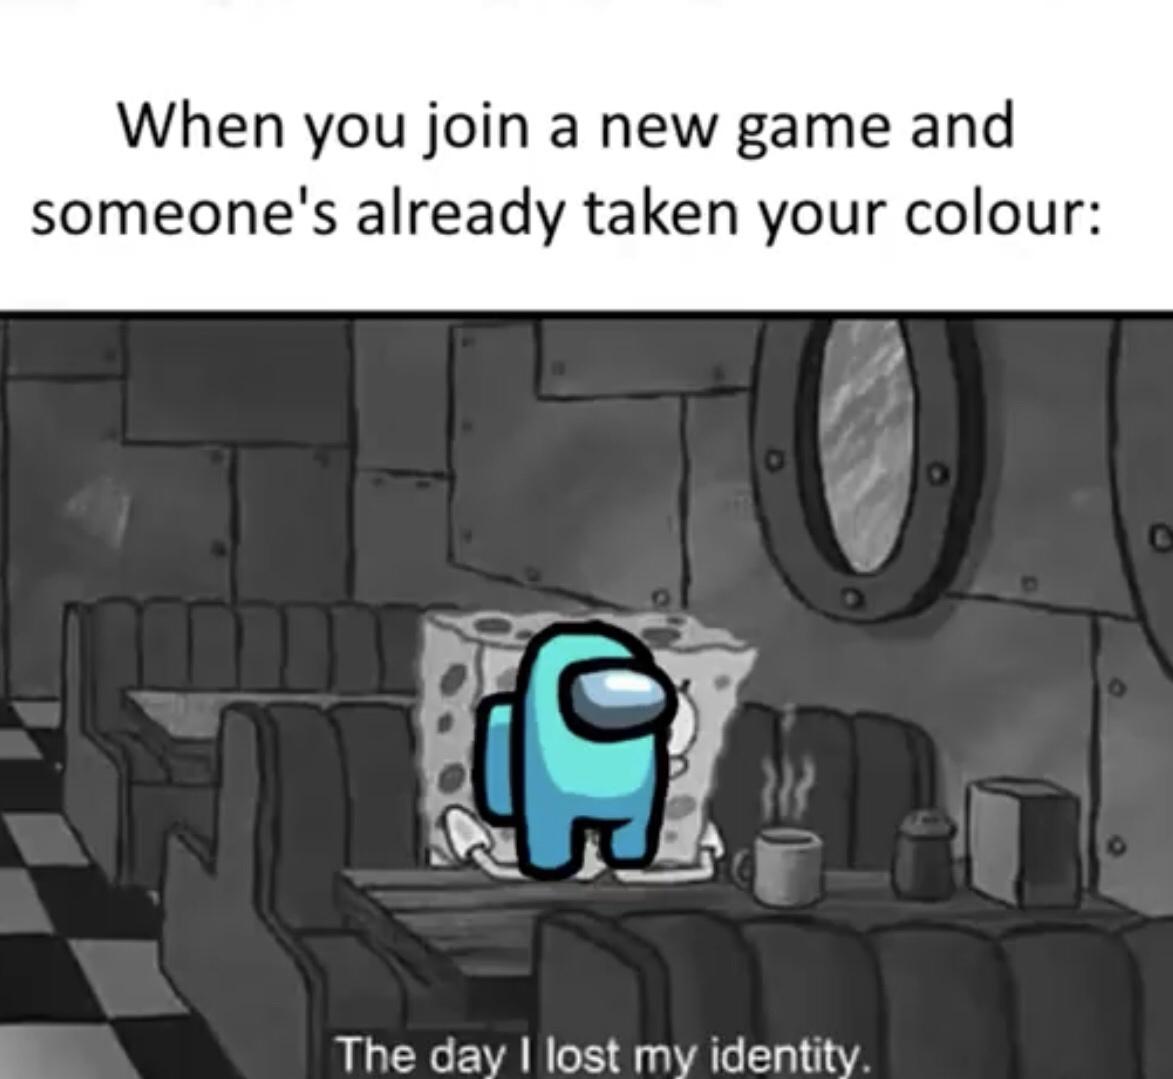 spongebob in coffee shop - When you join a new game and someone's already taken your colour 0 The day I lost my identity.